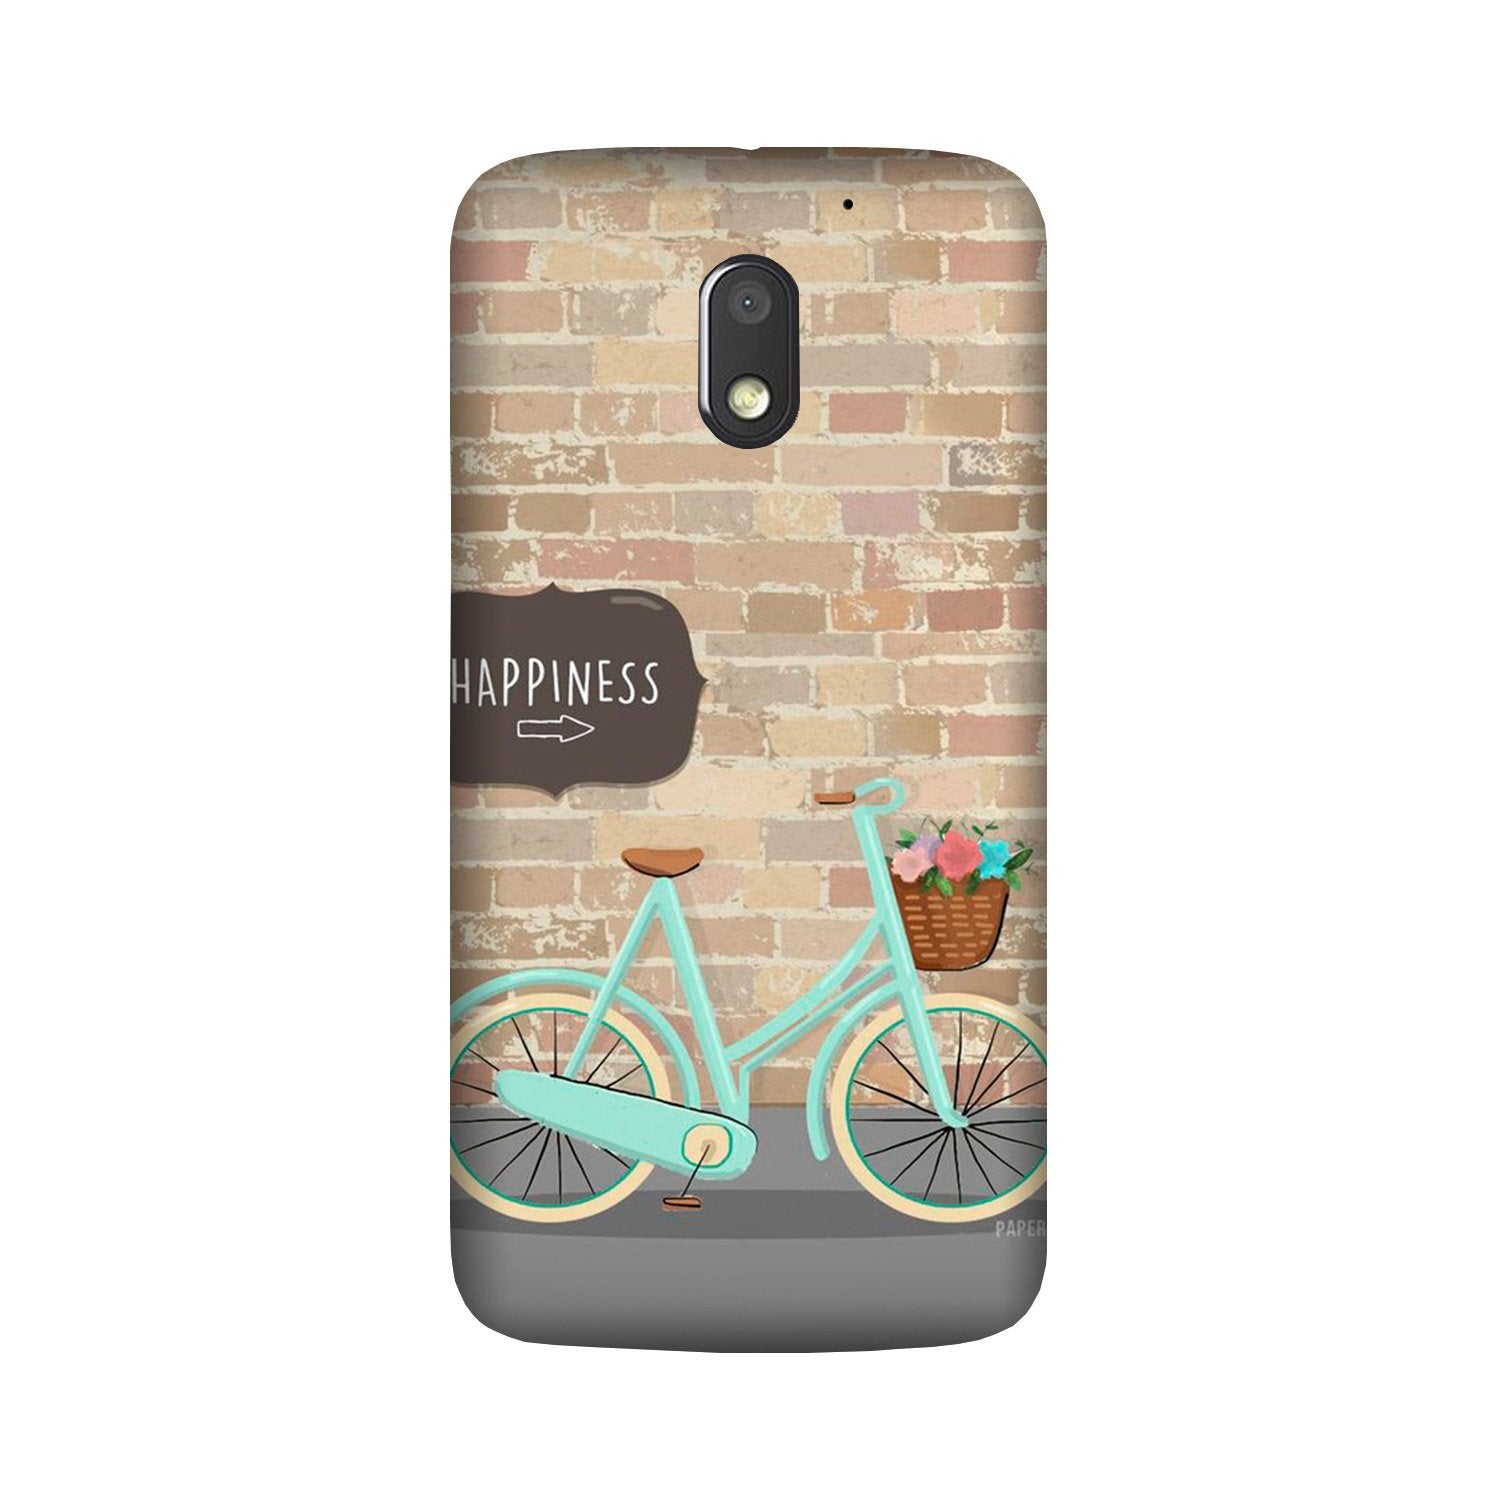 Happiness Case for Moto G4 Play